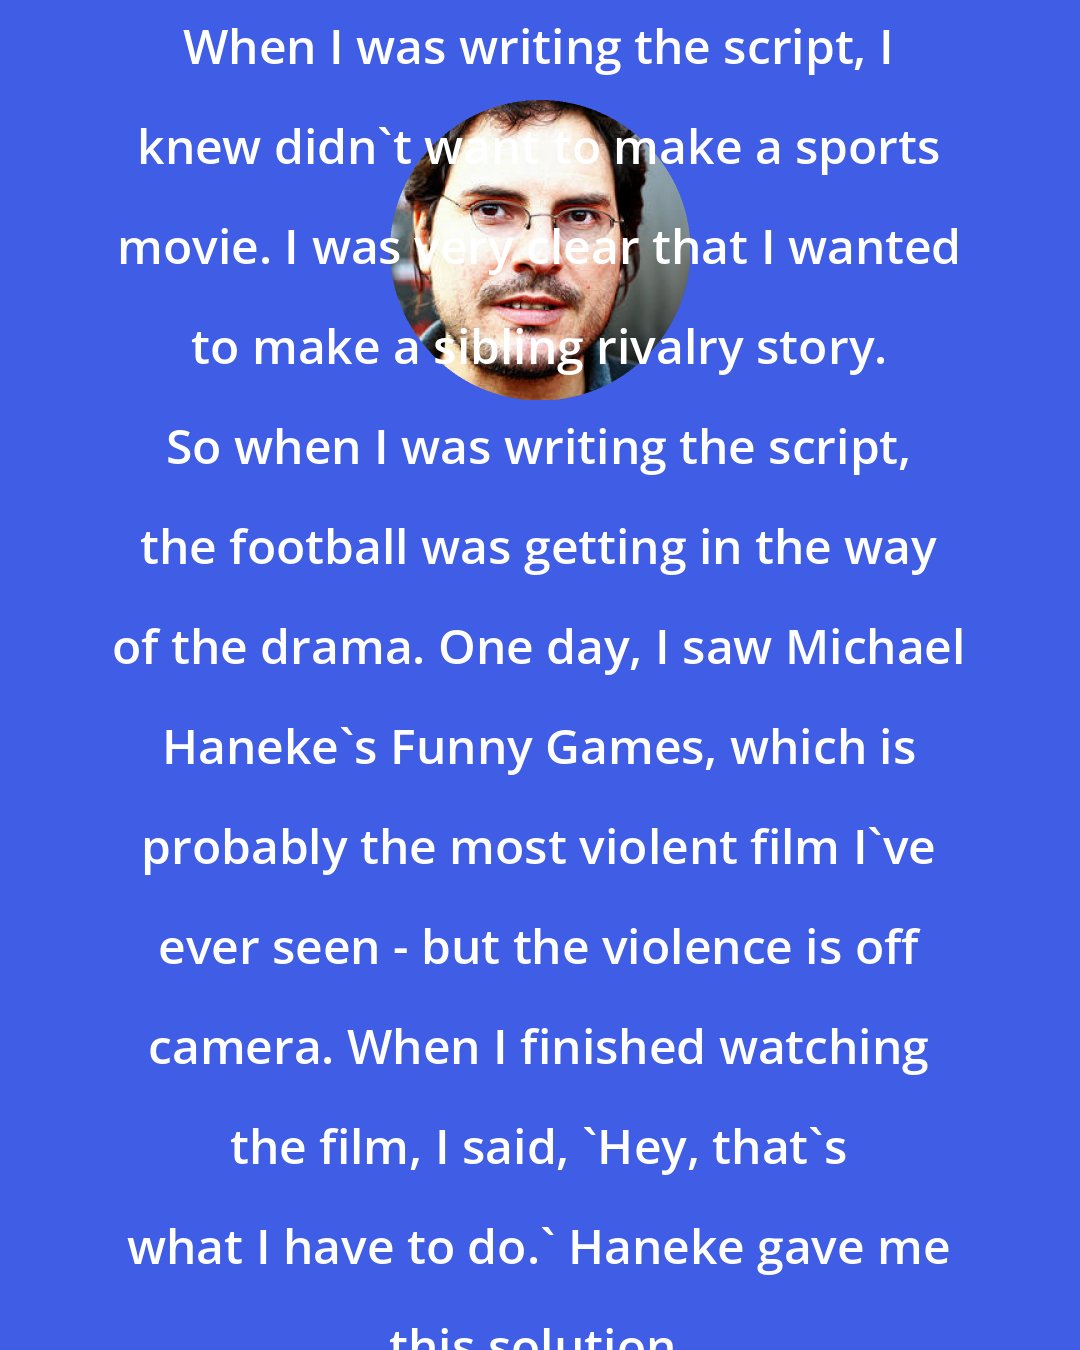 Carlos Cuaron: When I was writing the script, I knew didn't want to make a sports movie. I was very clear that I wanted to make a sibling rivalry story. So when I was writing the script, the football was getting in the way of the drama. One day, I saw Michael Haneke's Funny Games, which is probably the most violent film I've ever seen - but the violence is off camera. When I finished watching the film, I said, 'Hey, that's what I have to do.' Haneke gave me this solution.